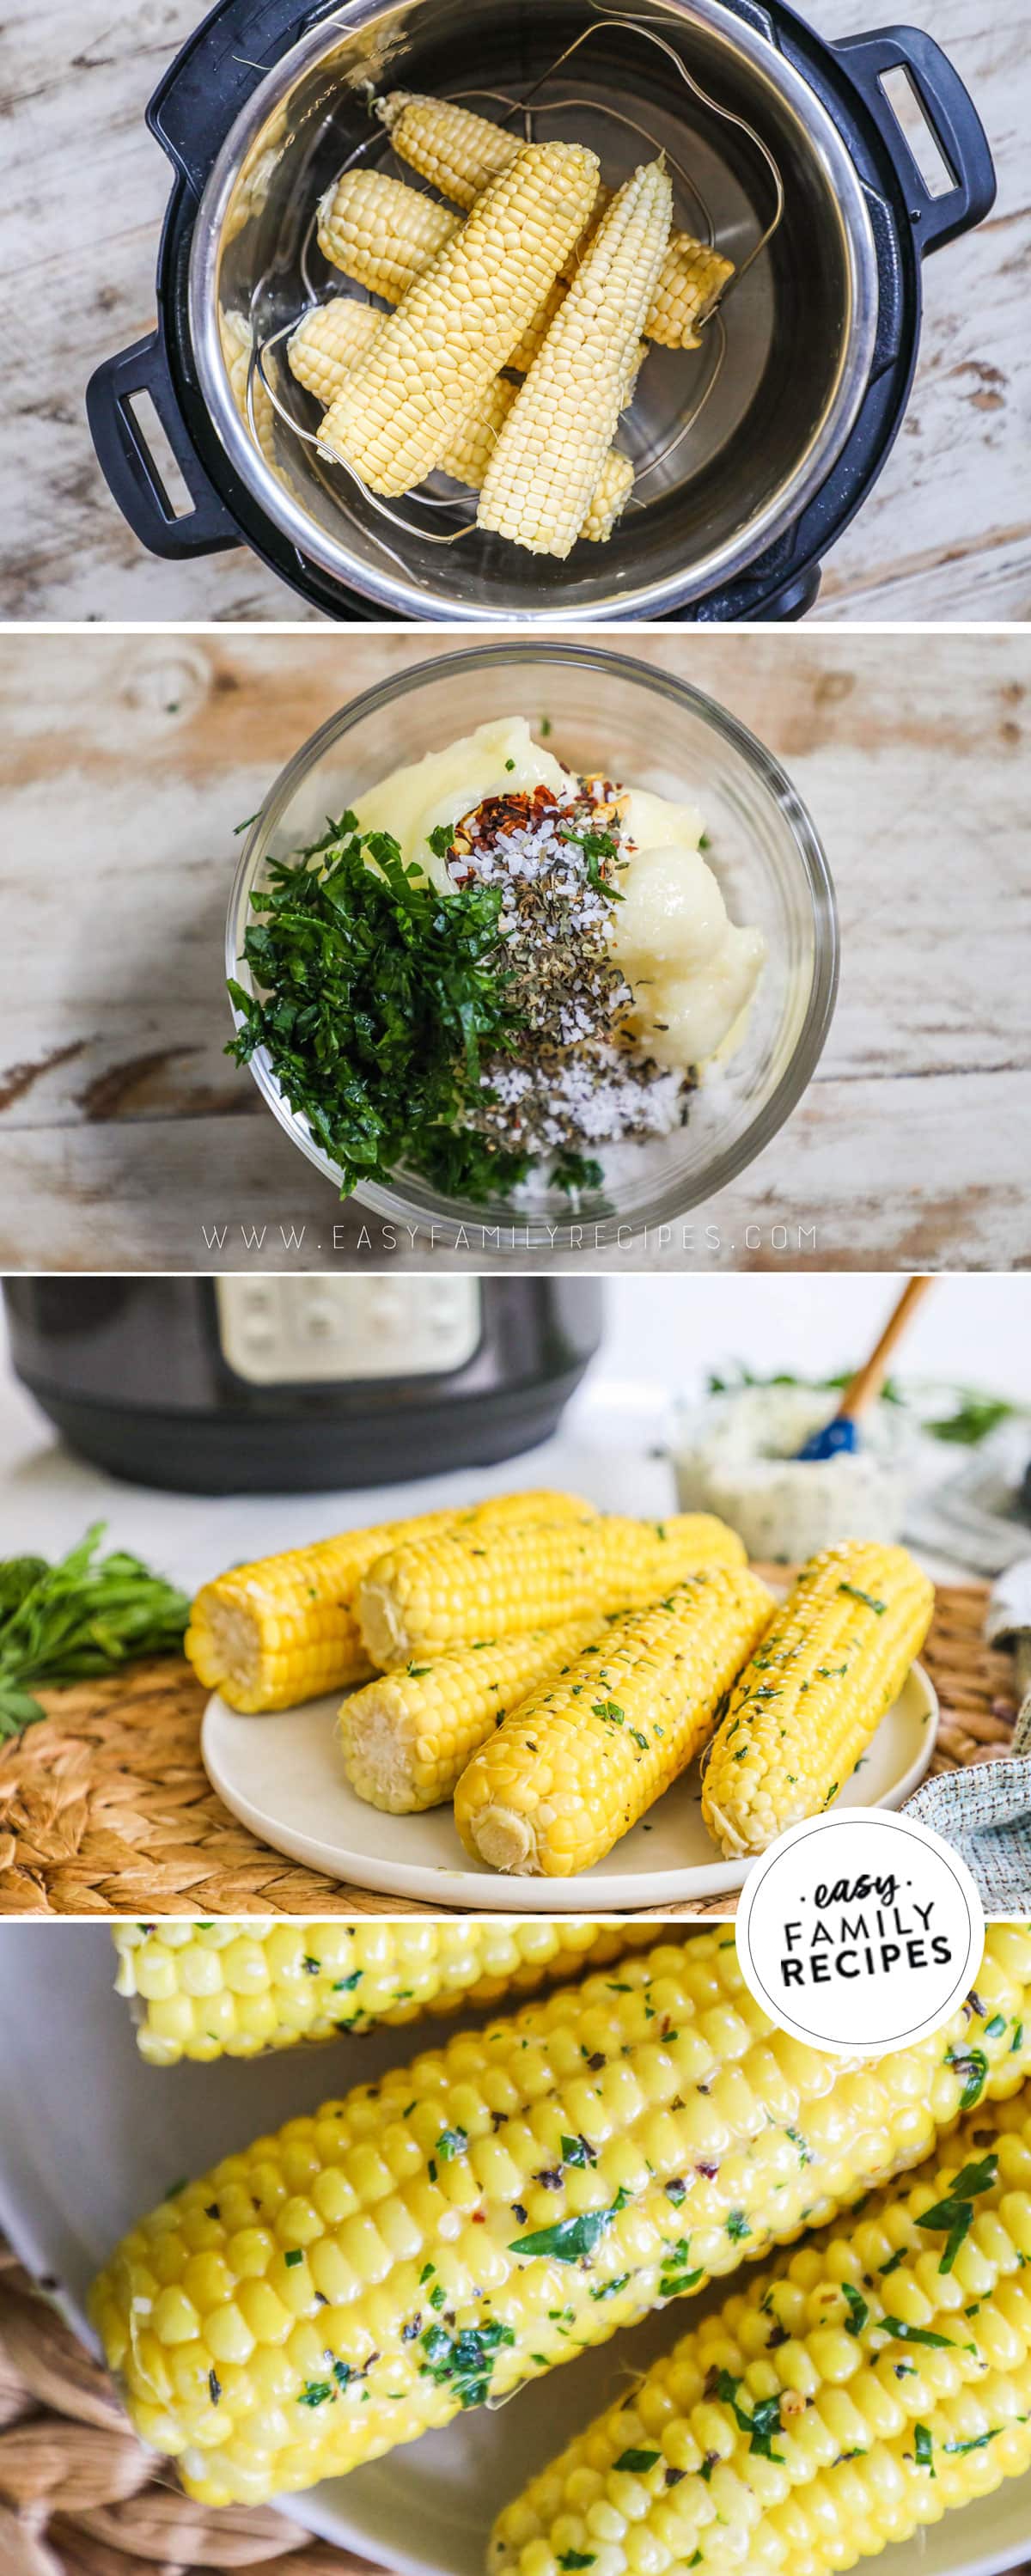 Step by step for making corn on the cob step one put husked corn into the pot step 2 mix garlic butter ingredients step 3 remove the corn from the Instant Pot step 4 add garlic butter.